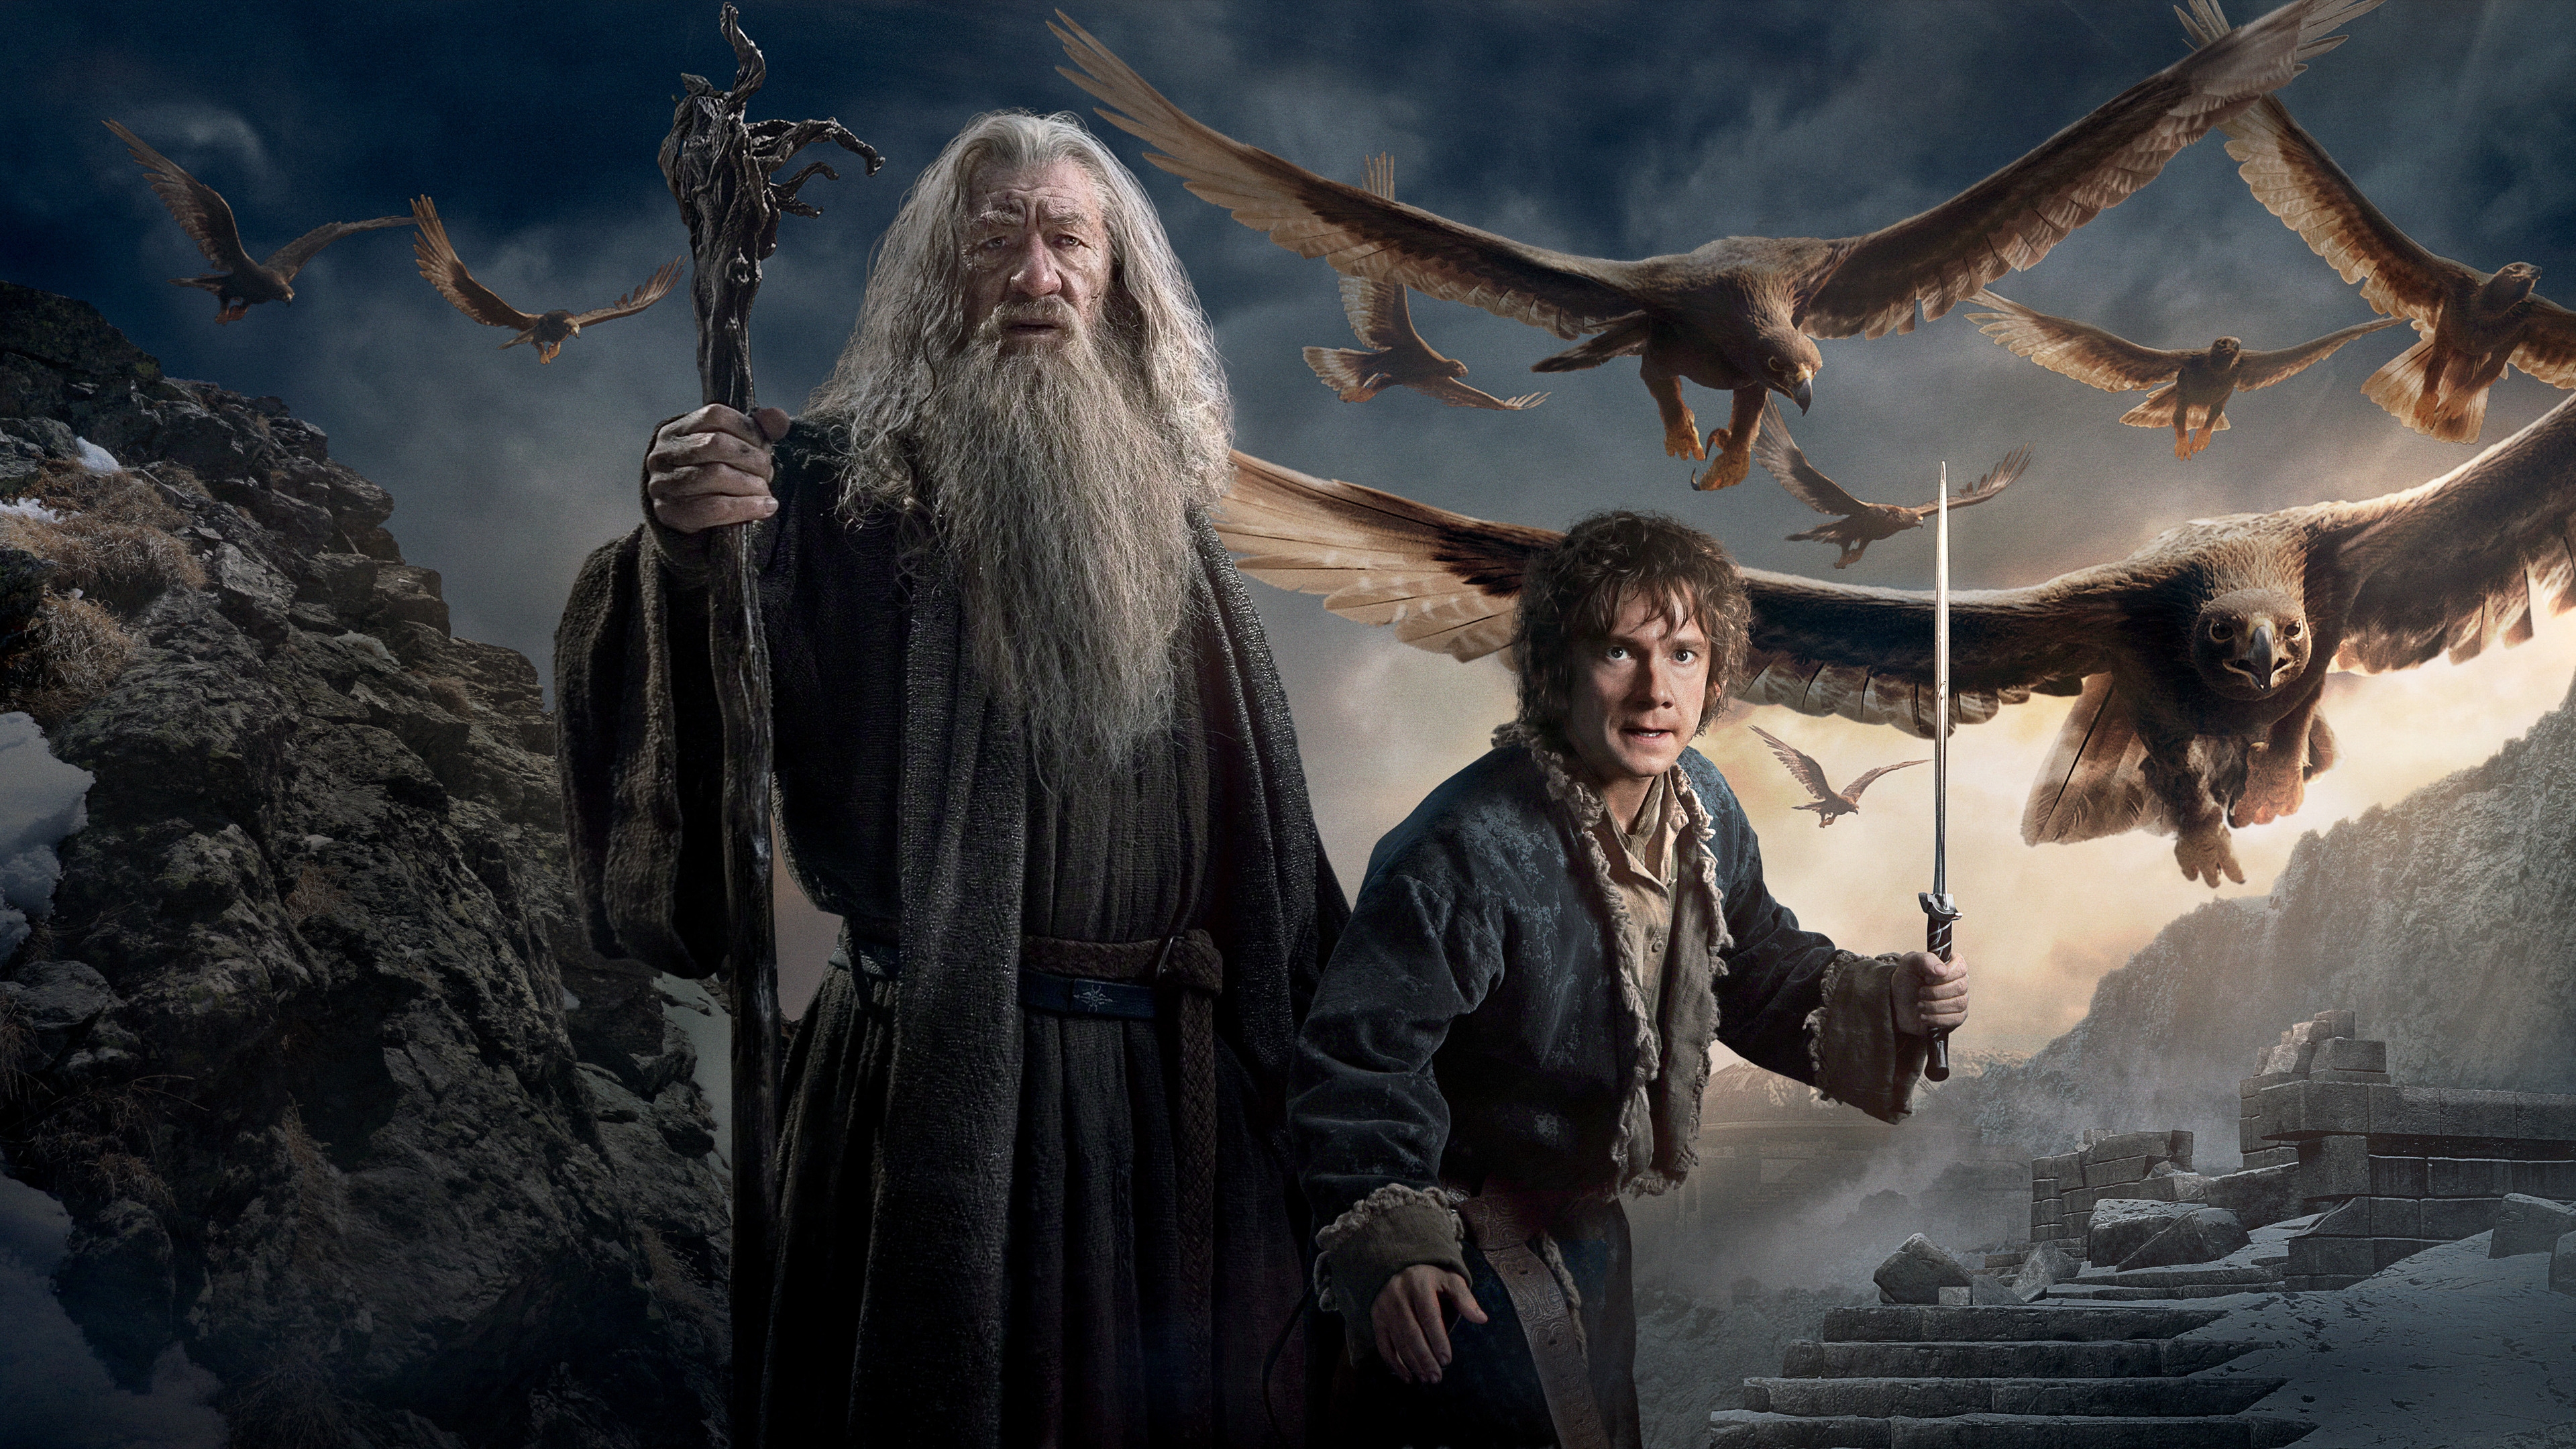 The Hobbit The Battle Of The Five Armies for 3840 x 2160 Ultra HD resolution